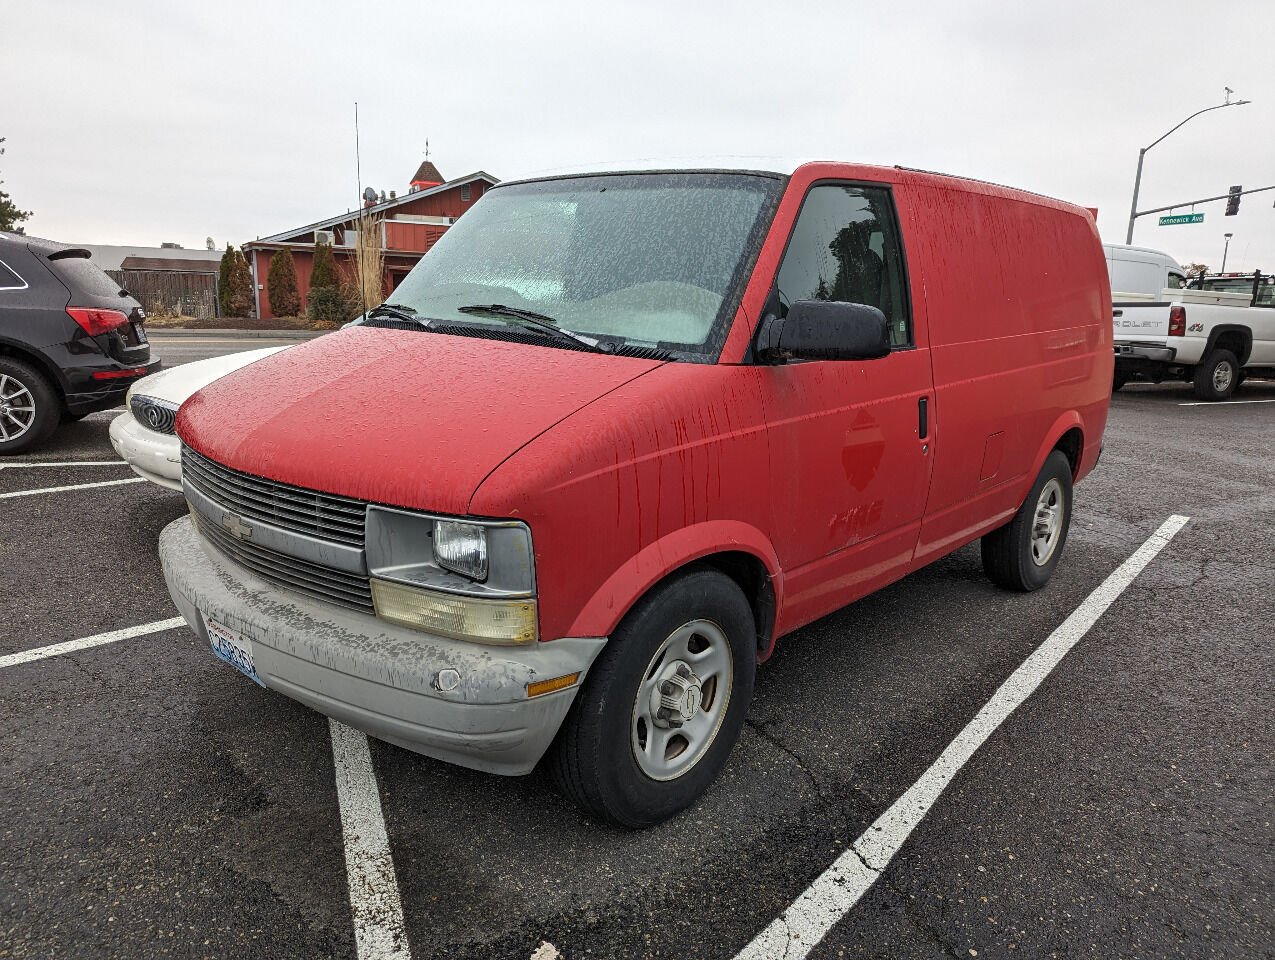 Rare Trail Wagons 4x4 1986 Chevy Astro Van With V-8 Purchased for $500!